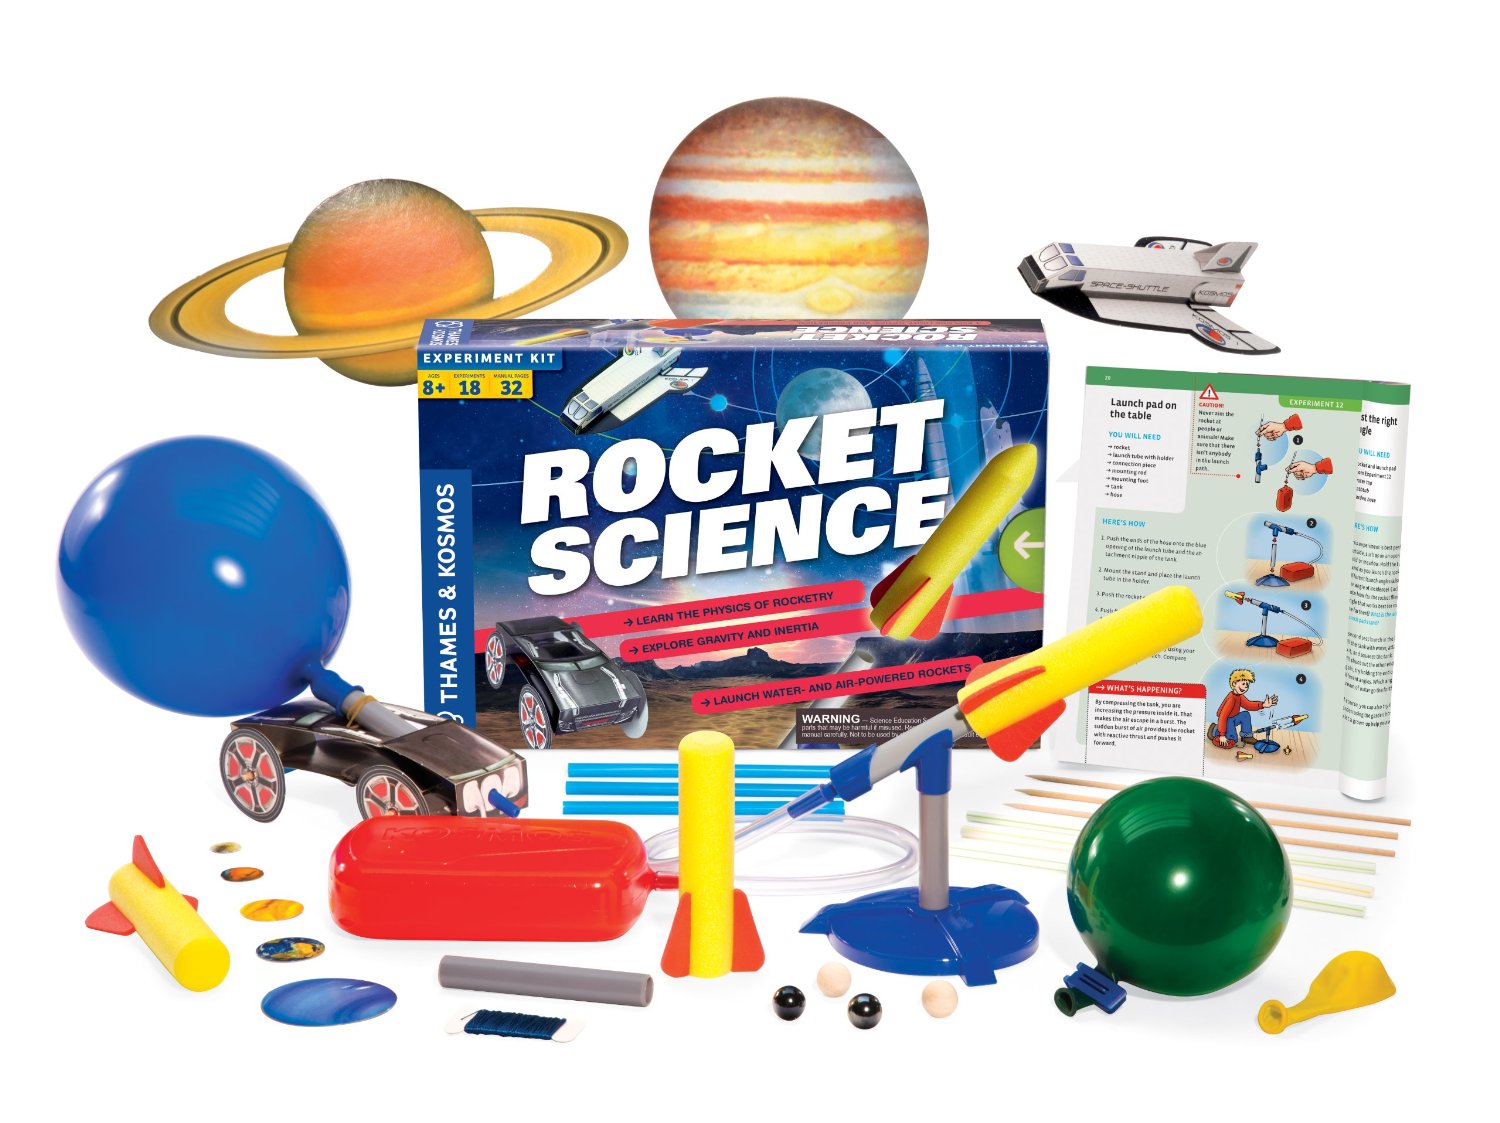 Do any major retailers carry model kits for kids?